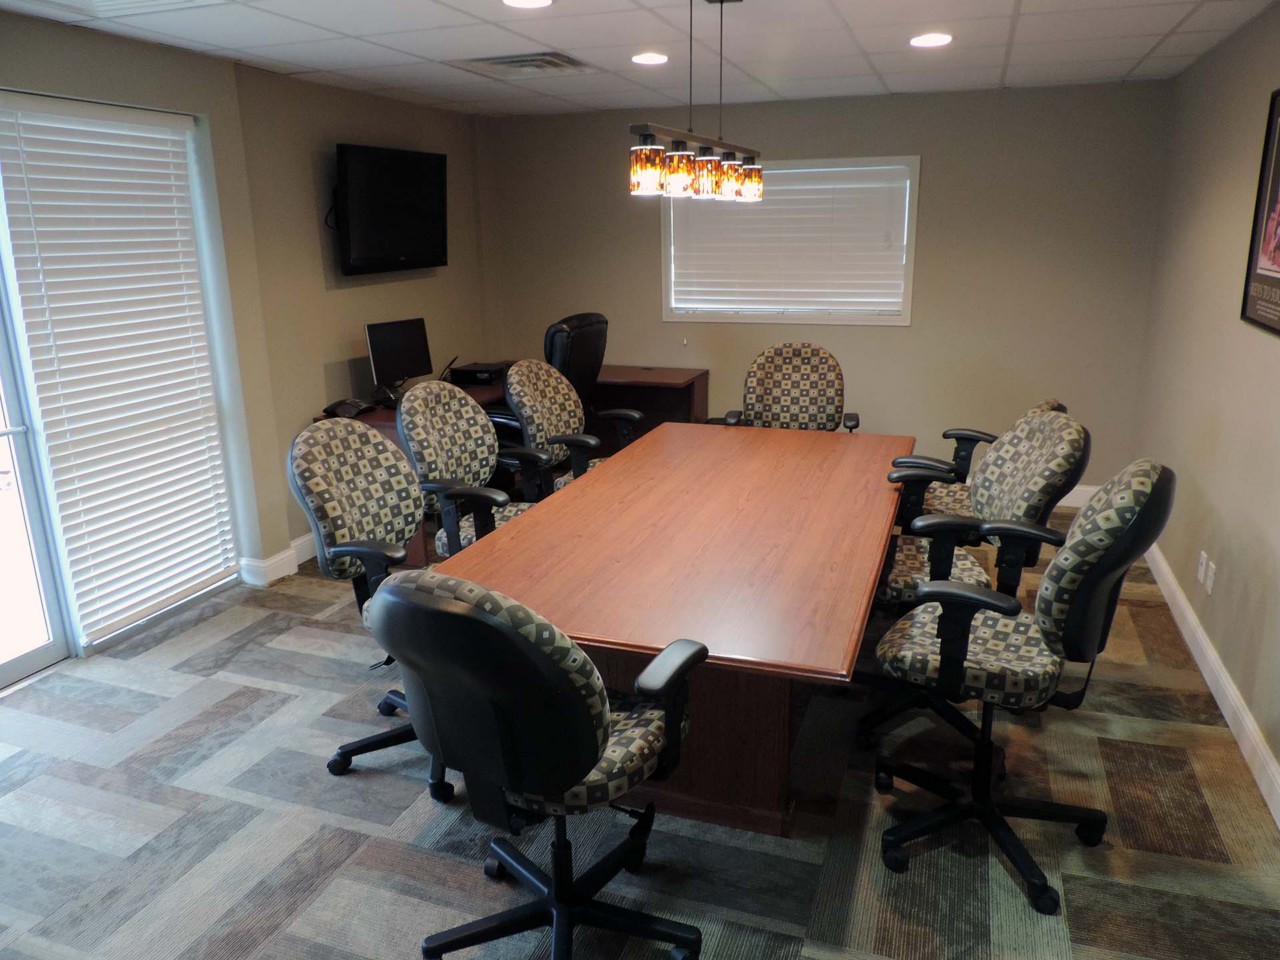 Conference or training room with available TV, computer and tables/chairs.          